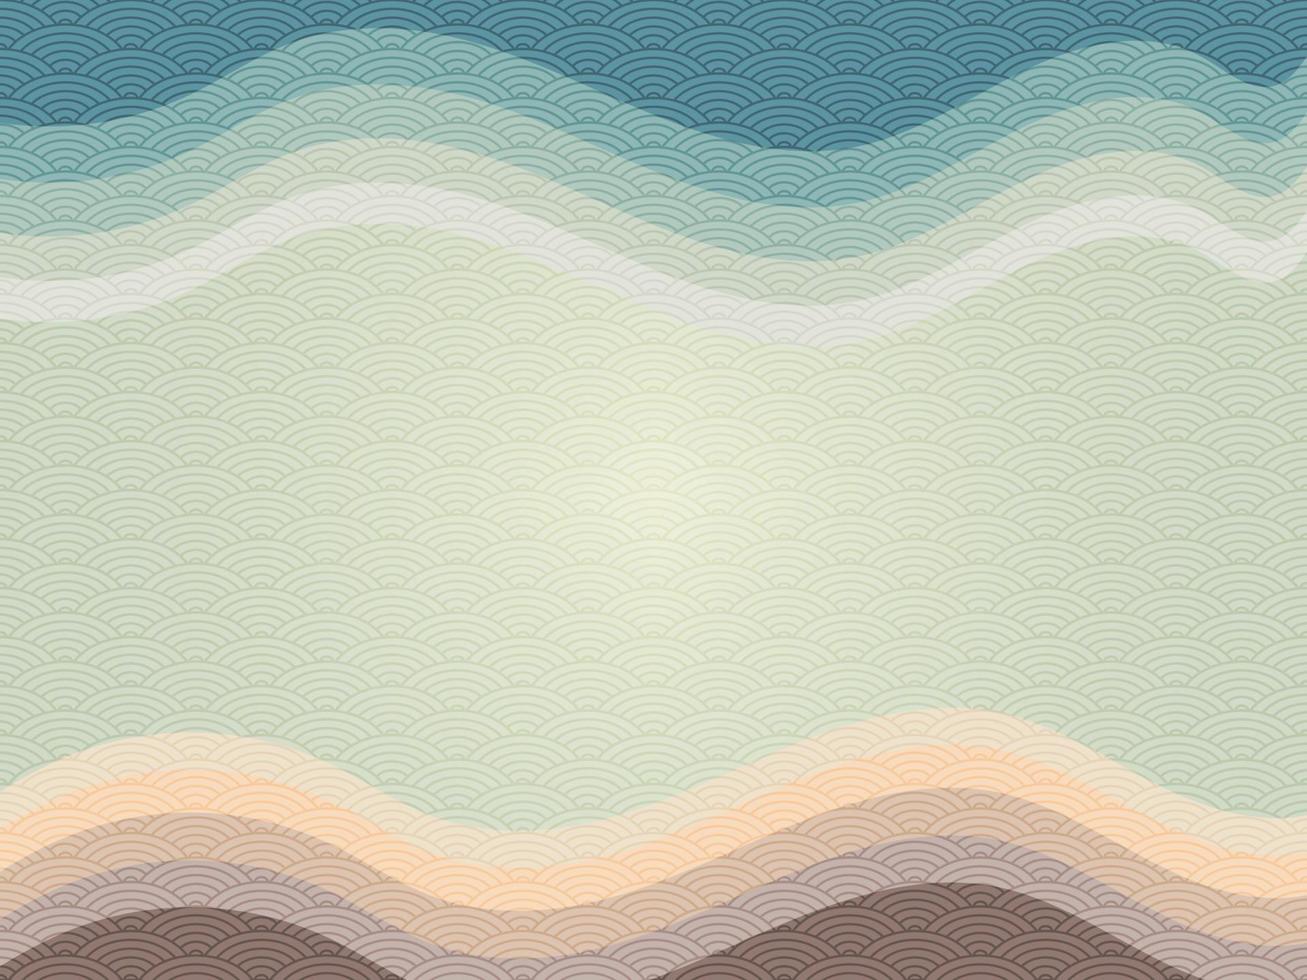 Background of waves of blue, green, and brown shades with a pattern of Japanese ocean waves in vintage style. Abstract wallpaper for prints, decor, wall art, and canvas prints. vector